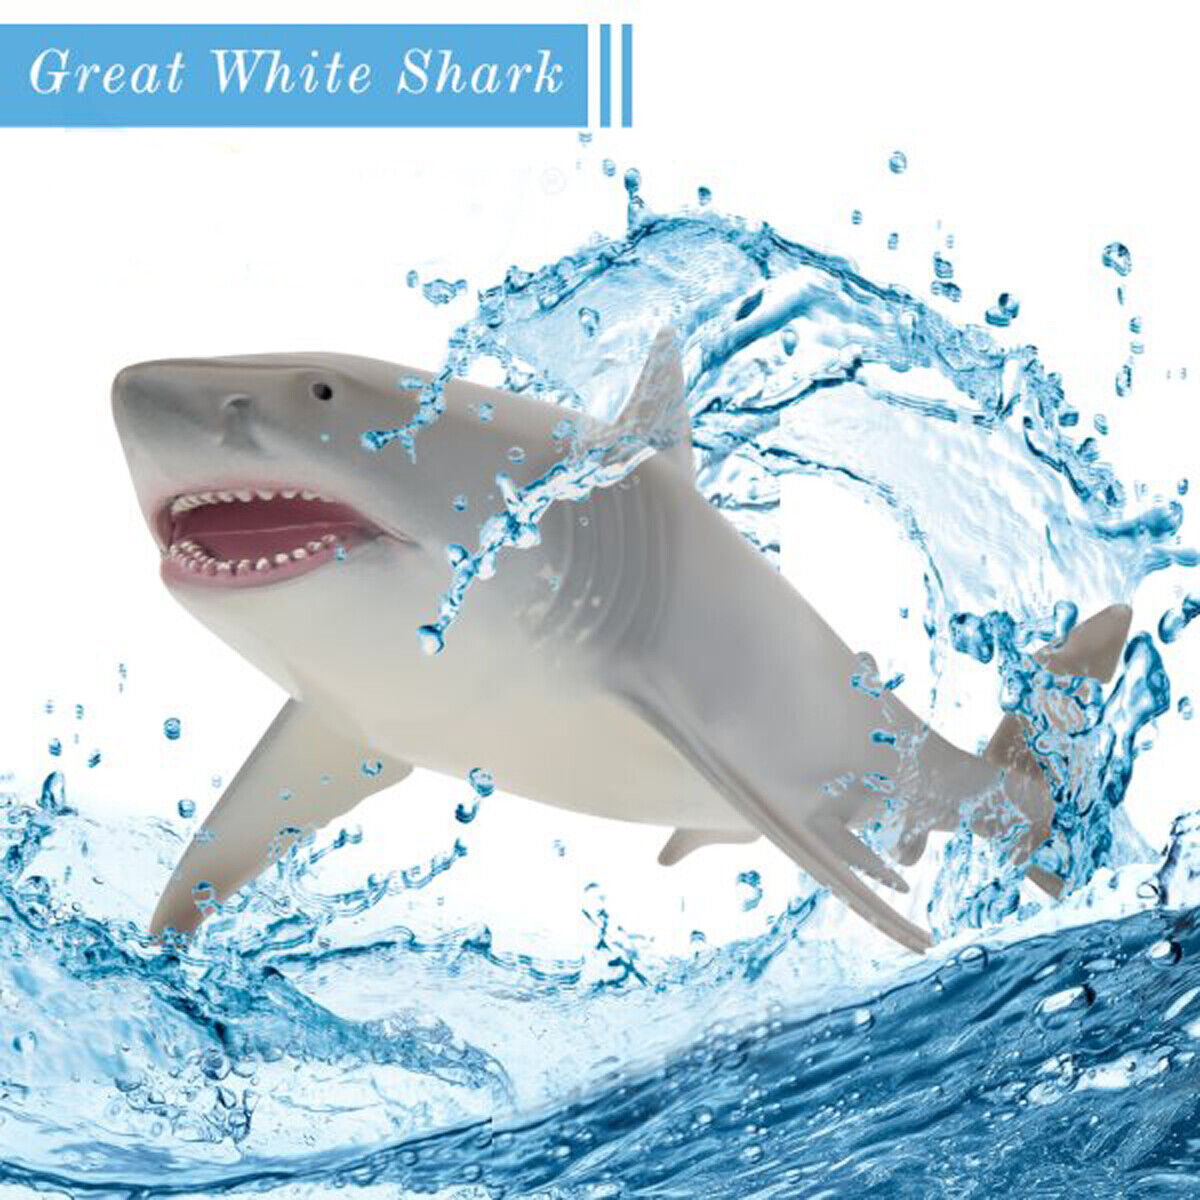 Great White Shark 10”hard Plastic Toy Blue Action Figure Ocean Jaws Collection